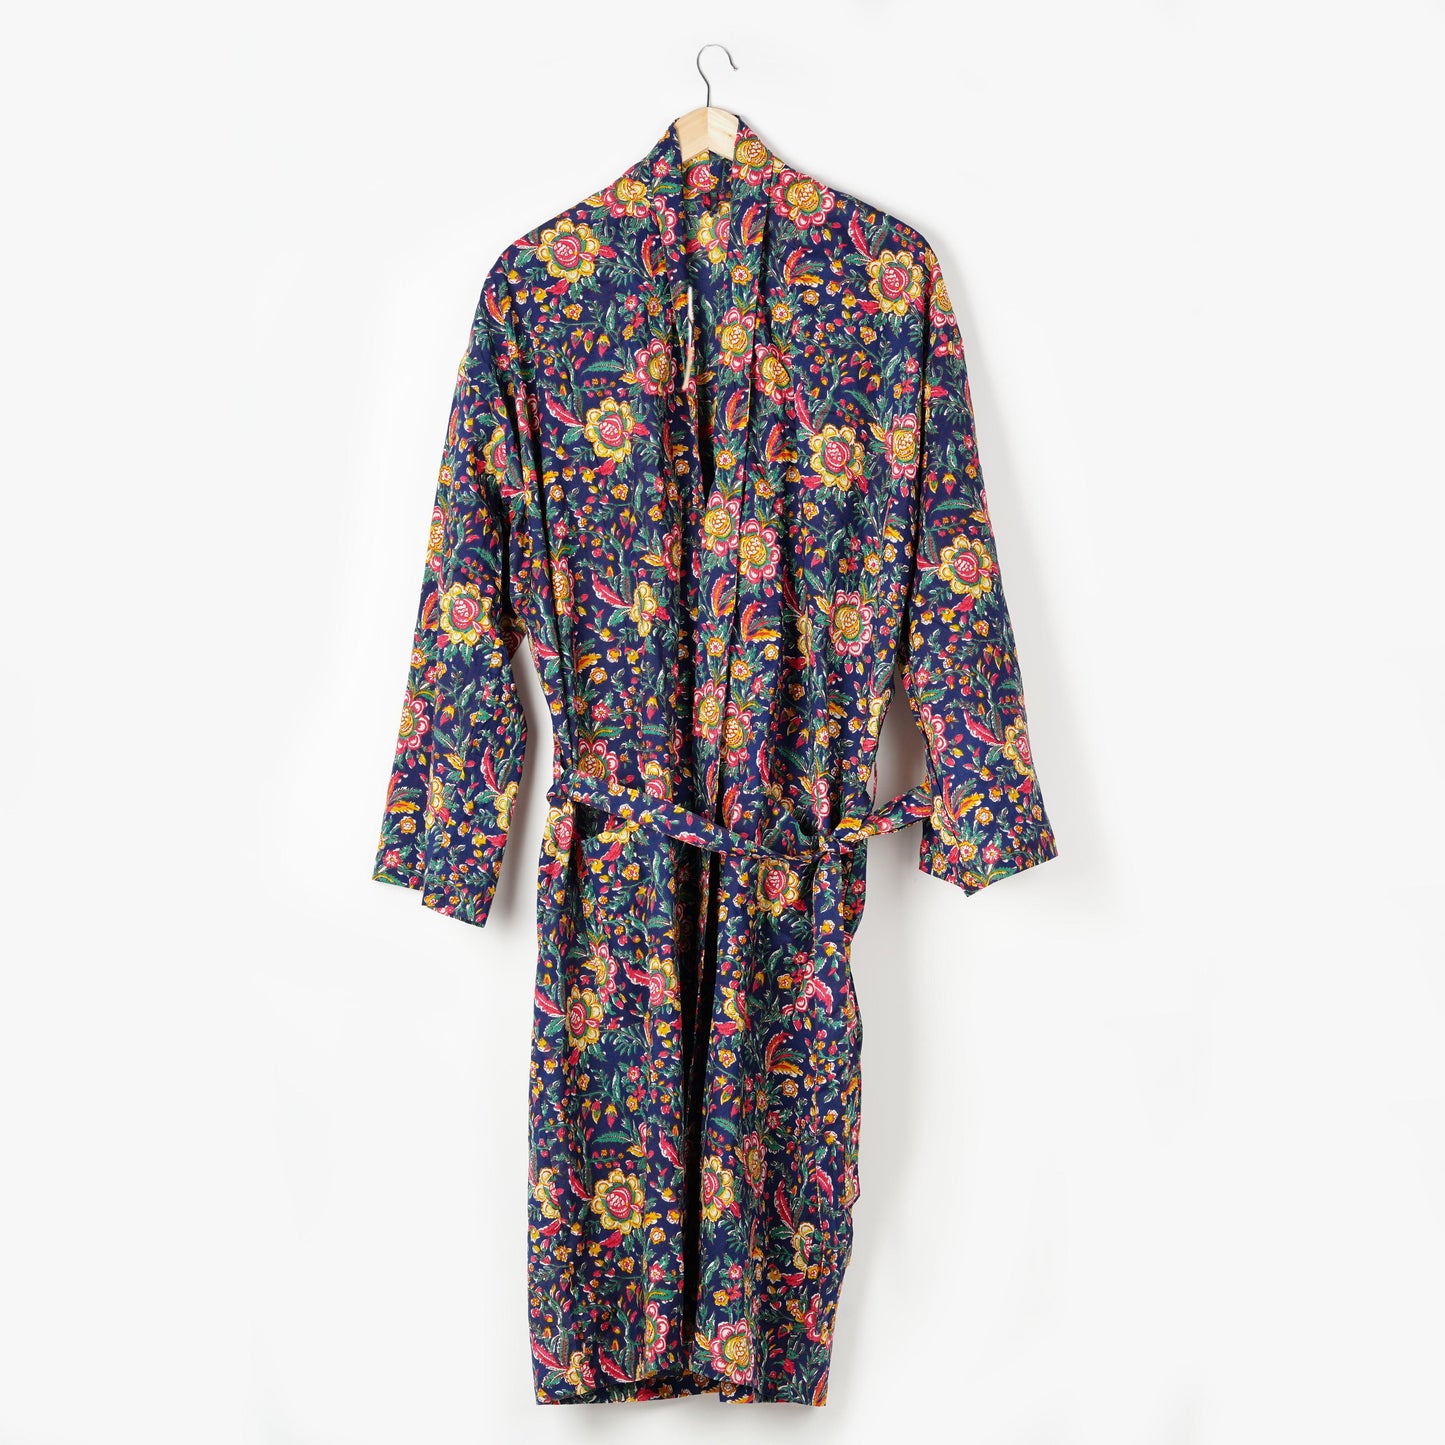 Kimono Bath Robes/ Night Suit -DS1 - The Teal Thread